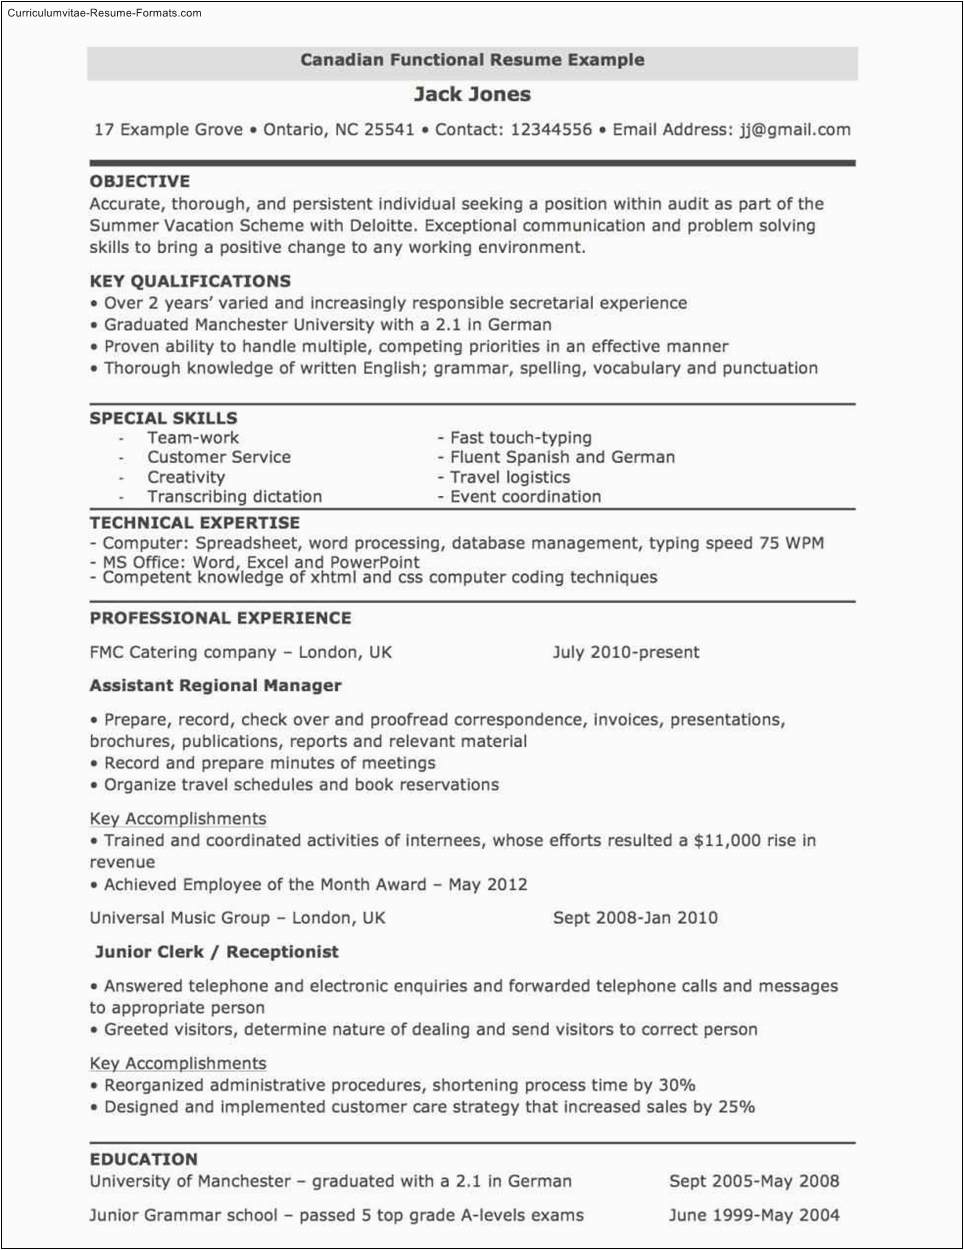 Resume Samples Canada for It Professionals Canada Resume Template